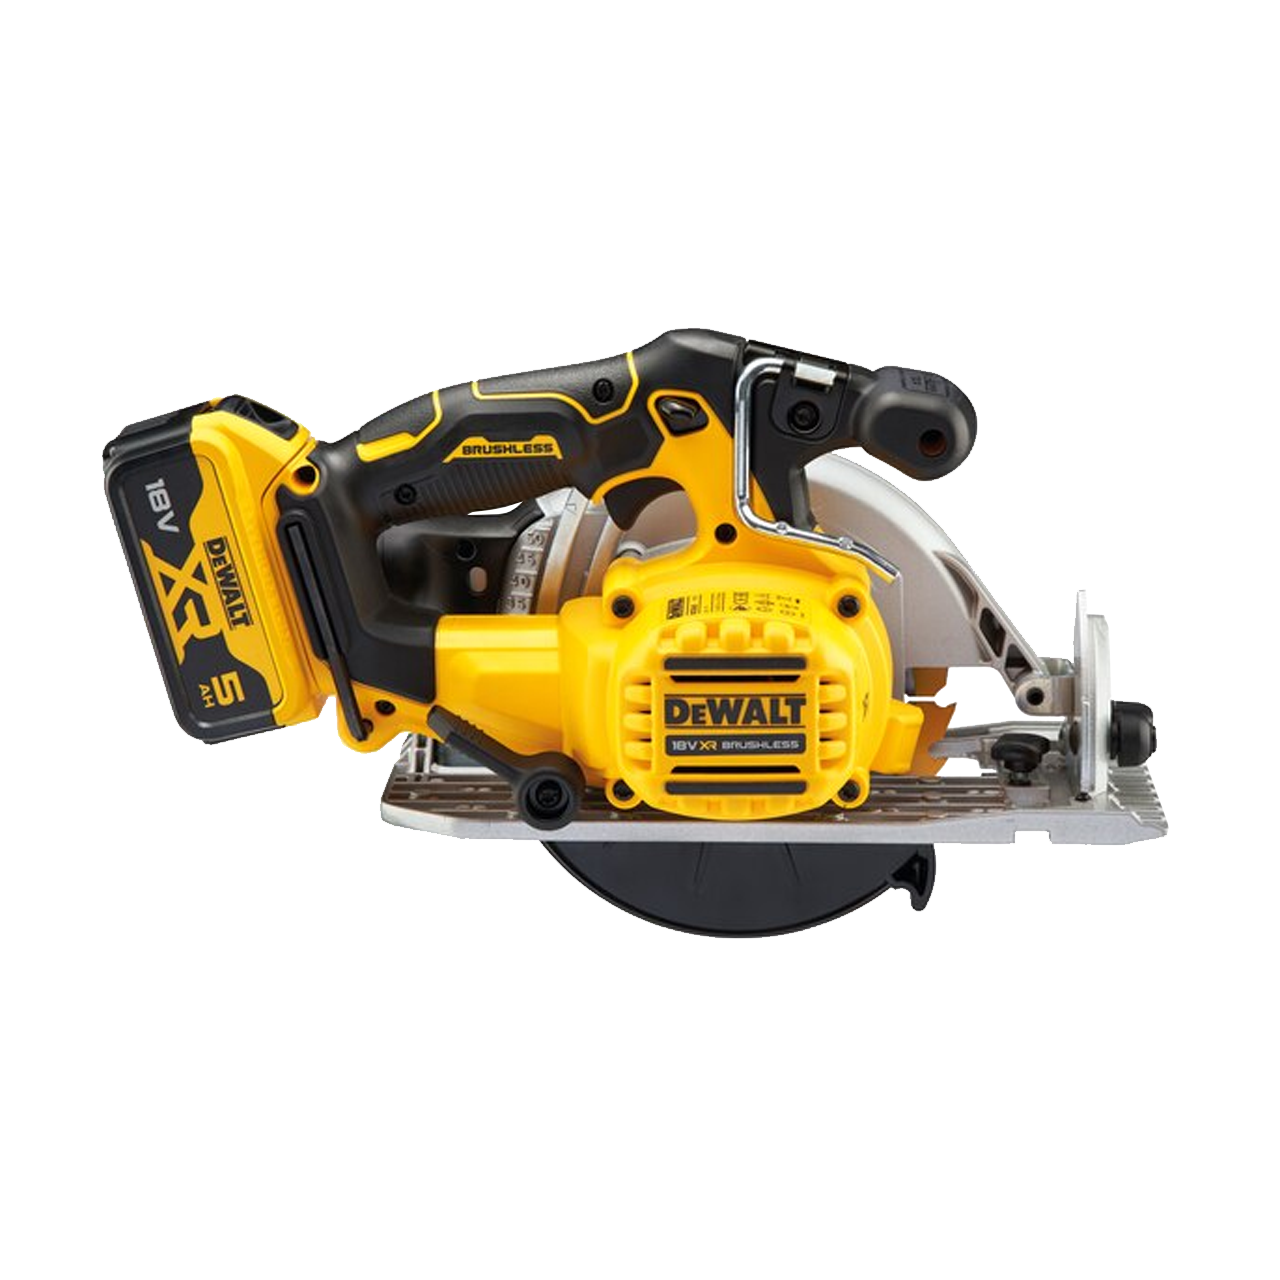 Circular saw DCS565 has direct compatibility with DEWALT AirLock system for easy, secure connection to extraction hose